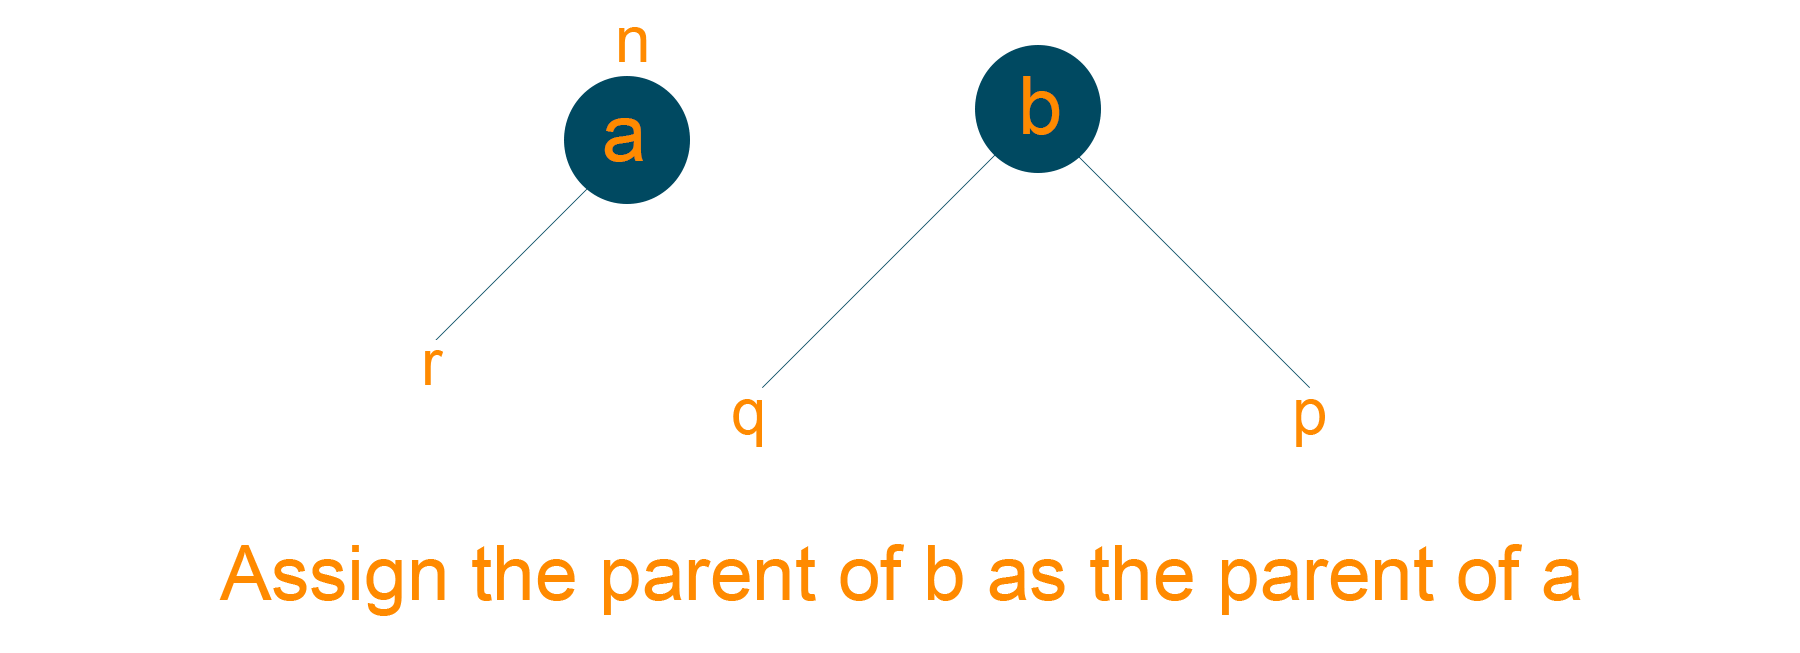 Assigning the parent of B as the parent of A